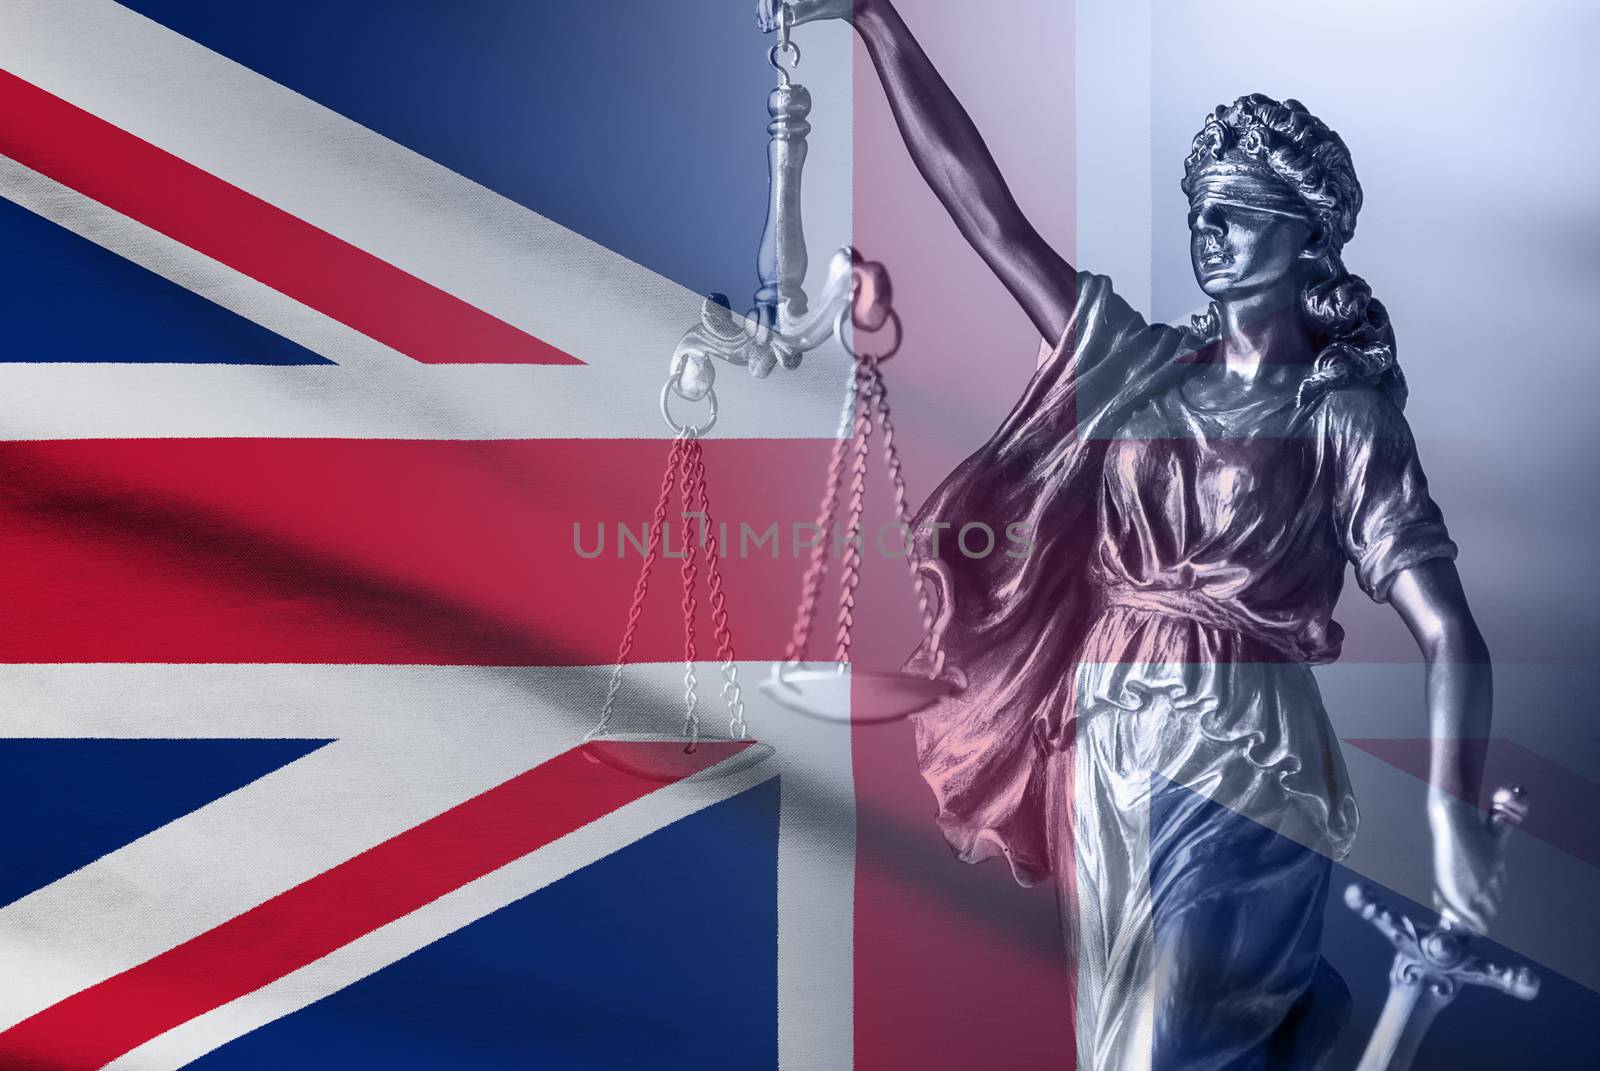 Statue of Justice over a British Union Jack flag holding the scales and sword of law enforcement and justice